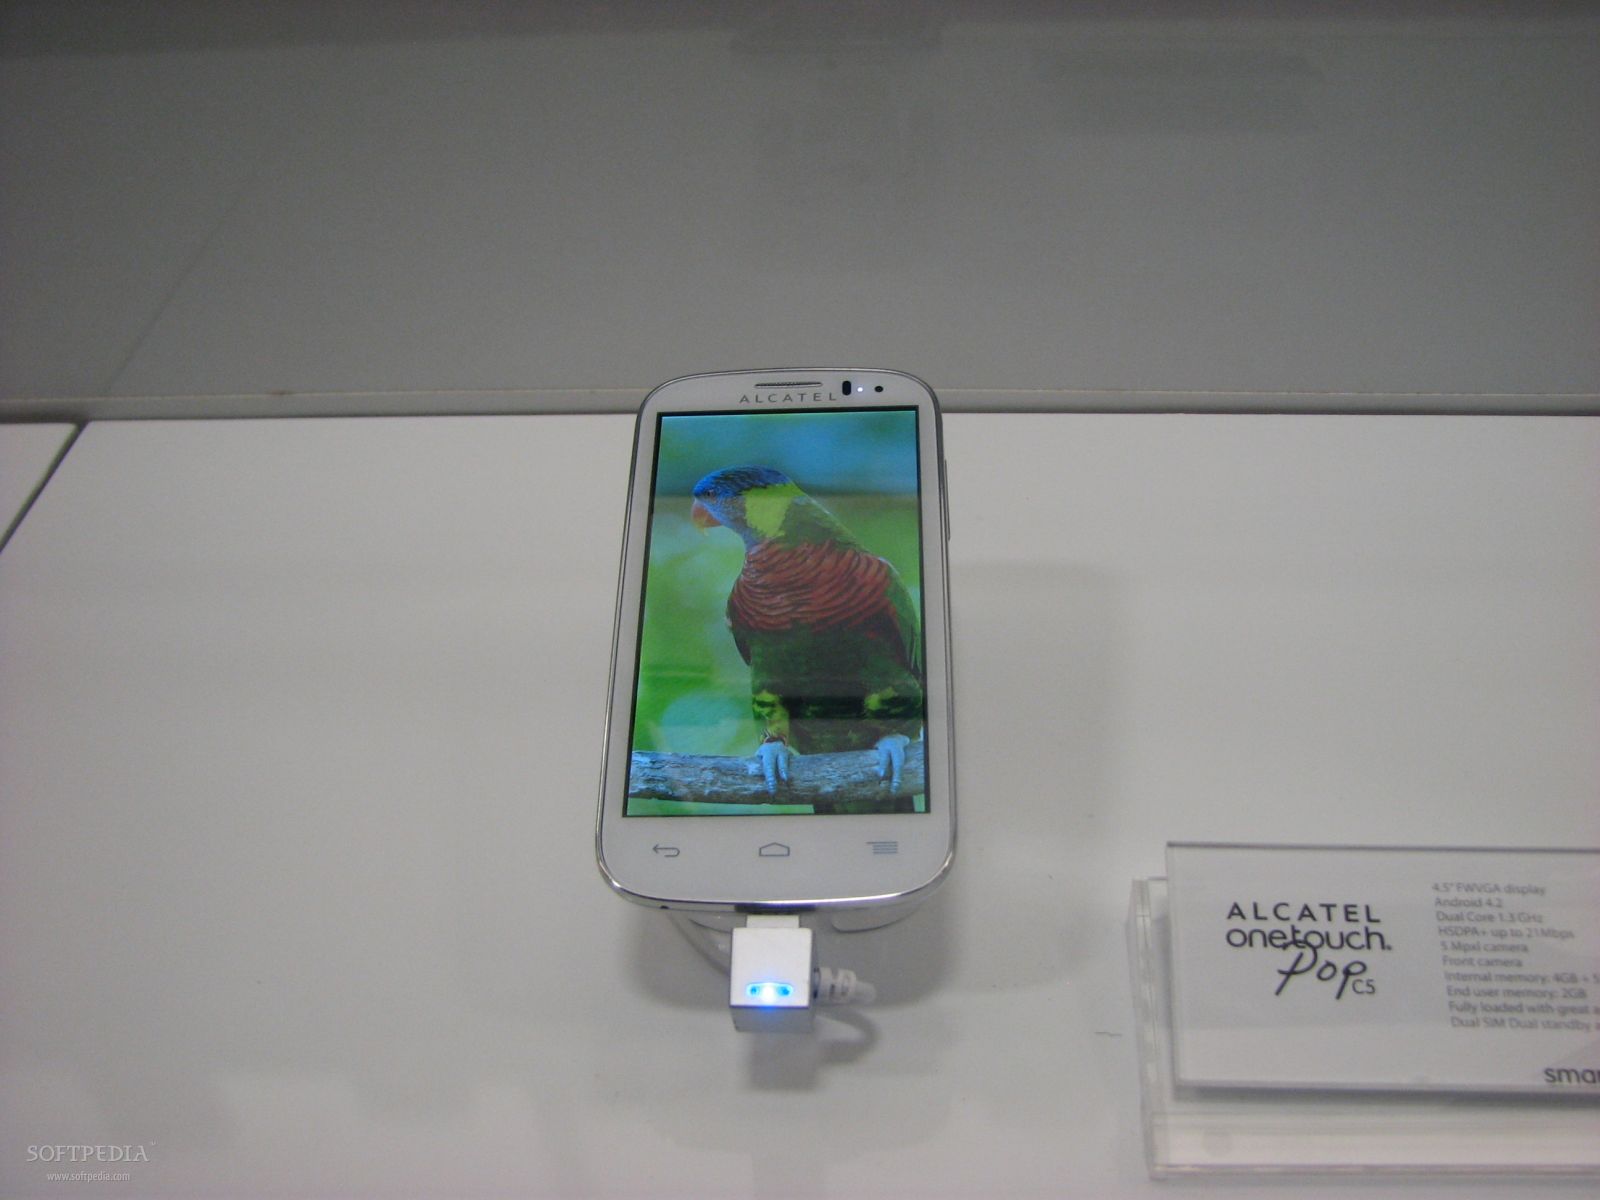 http://i1-news.softpedia-static.com/images/news2/IFA-2013-Alcatel-One-Touch-Pop-C5-Hands-on-381207-2.jpg?1378567168